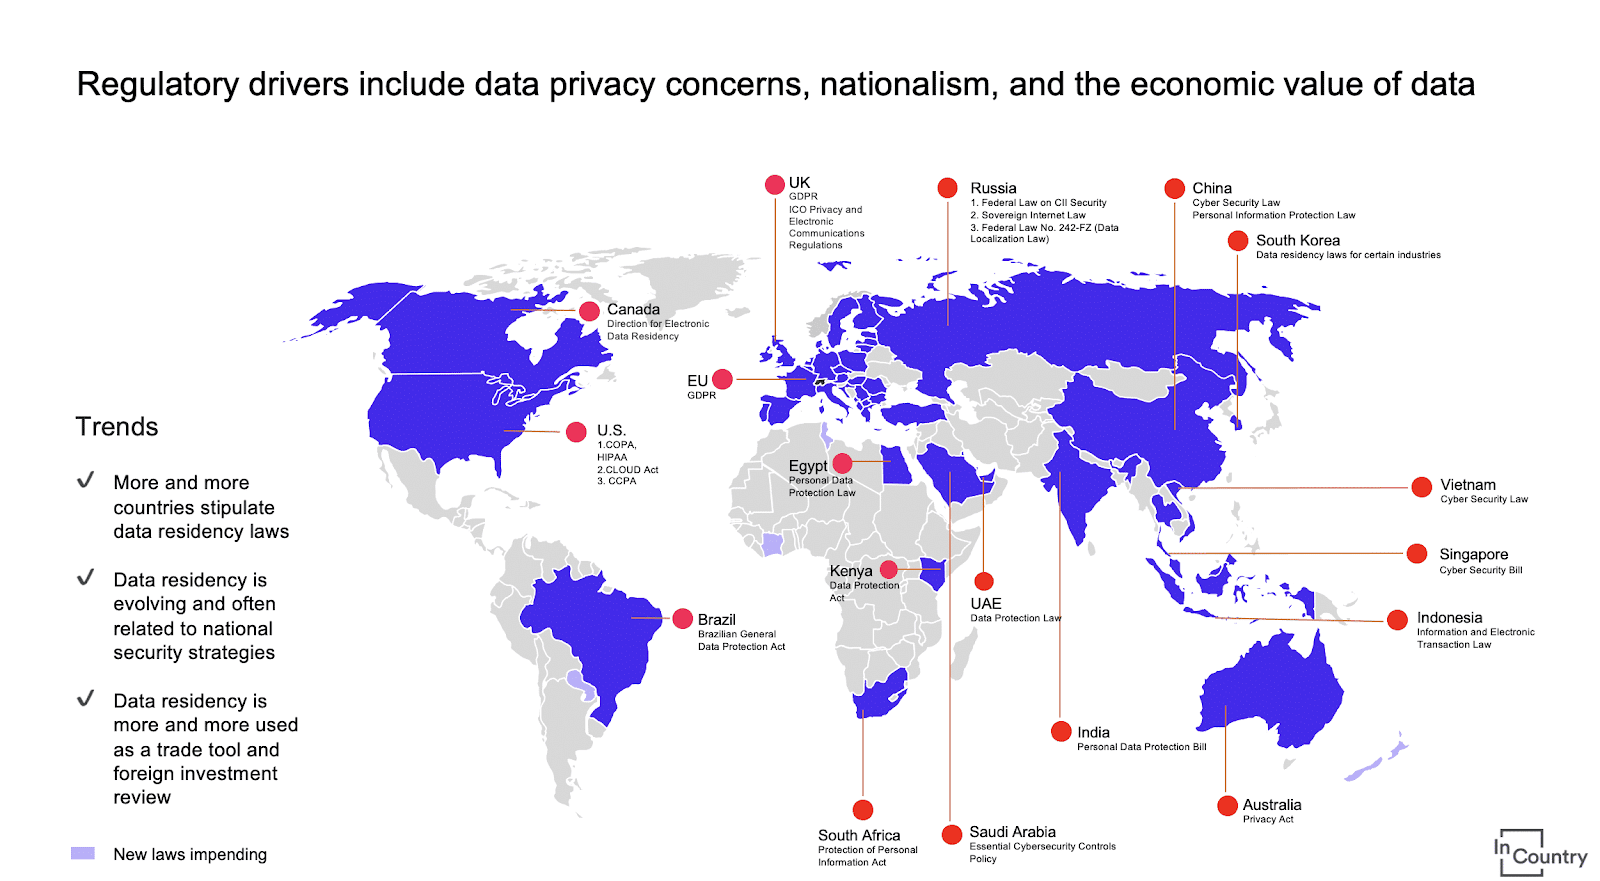 The 2021 Data Regulation Recap by In Country